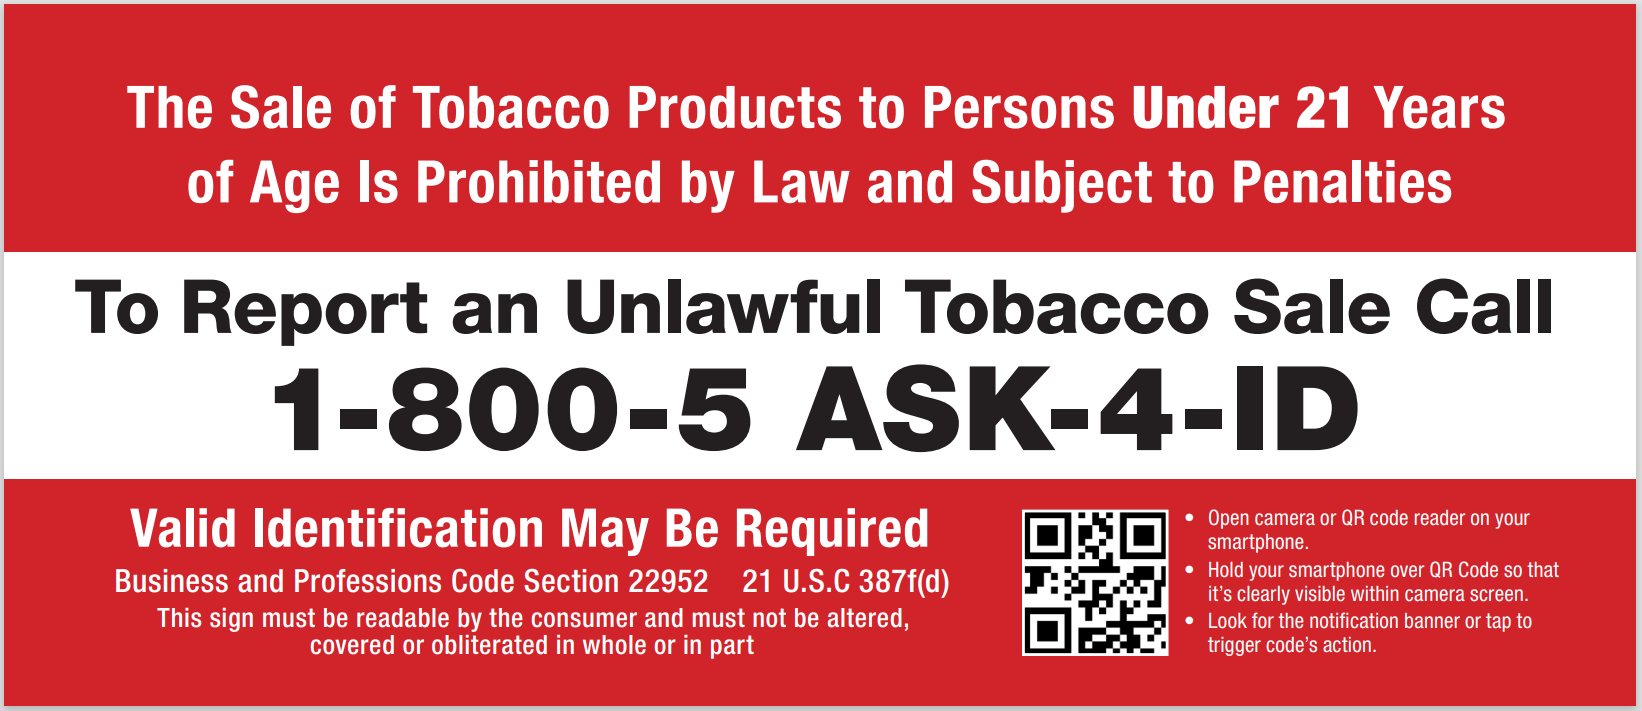 California Red Sign stating that Sale of Tobacco is prohibited to those under age 21